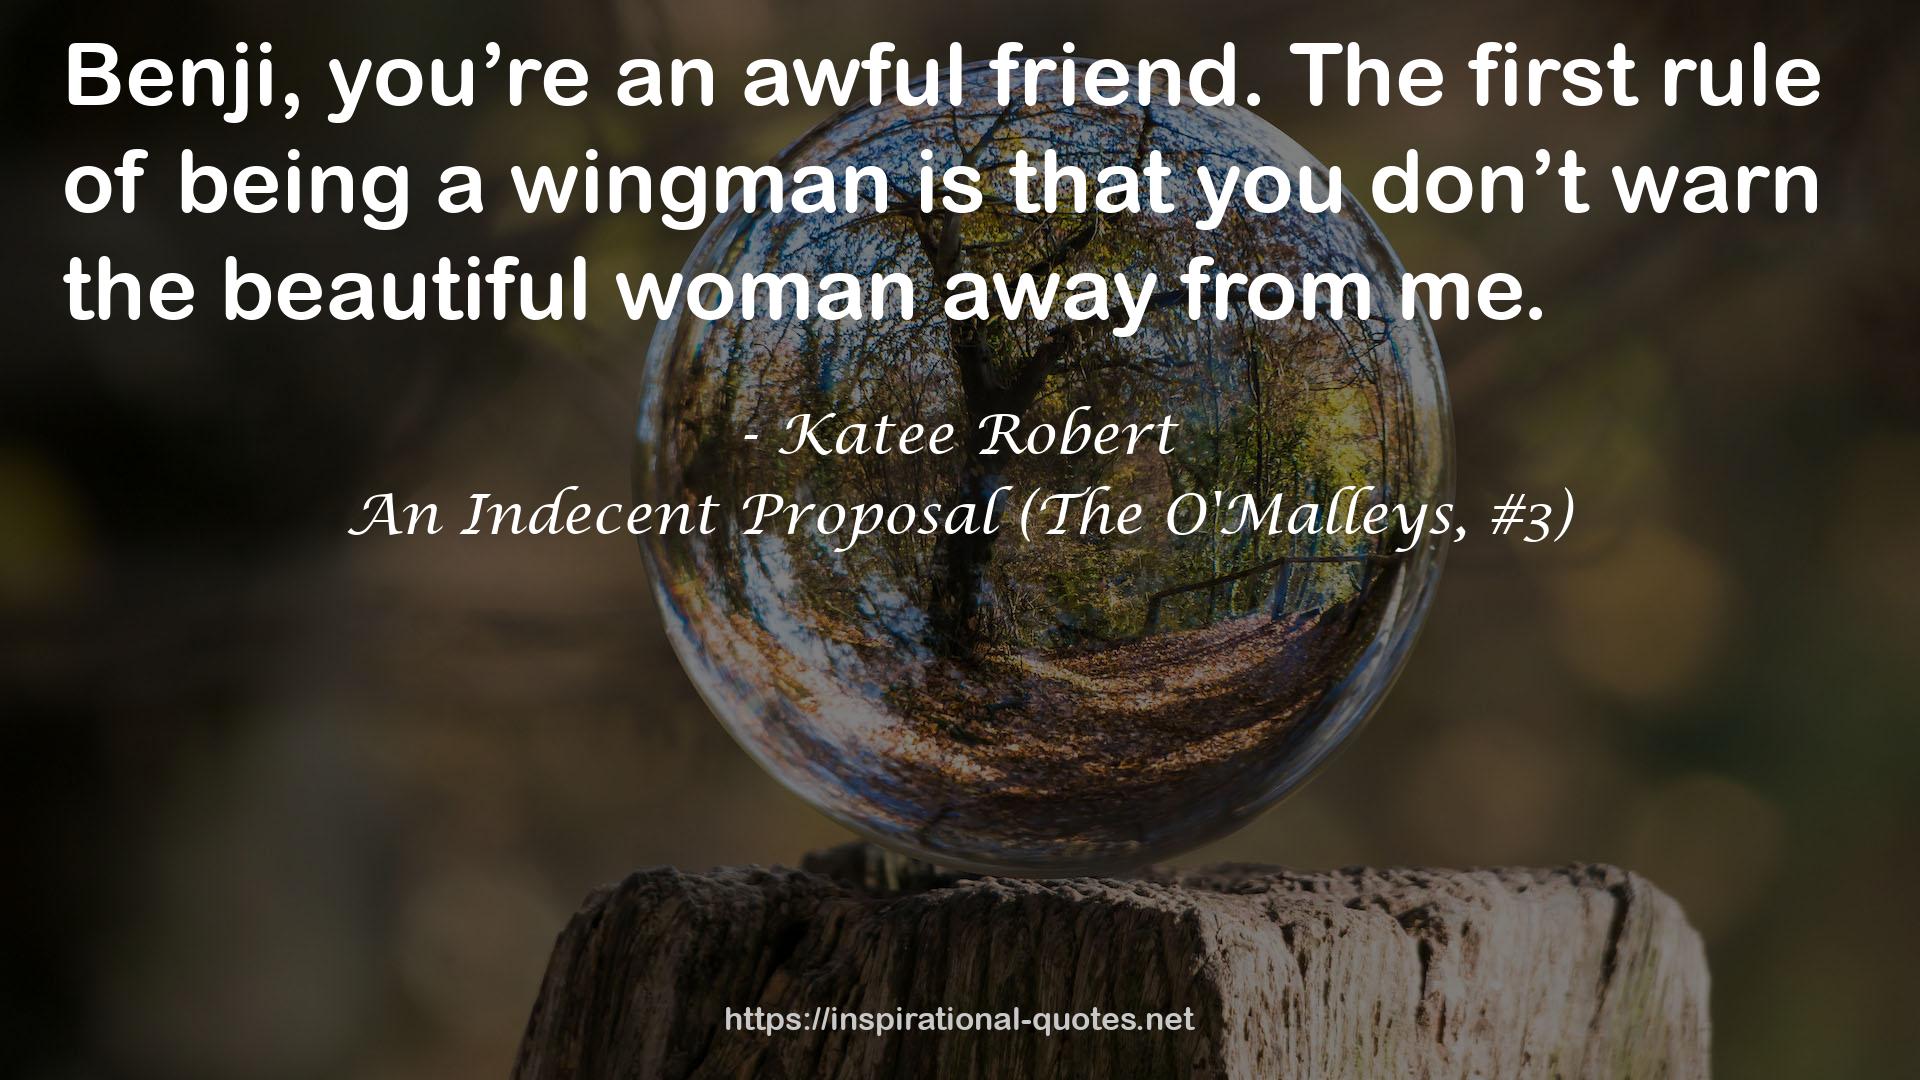 An Indecent Proposal (The O'Malleys, #3) QUOTES